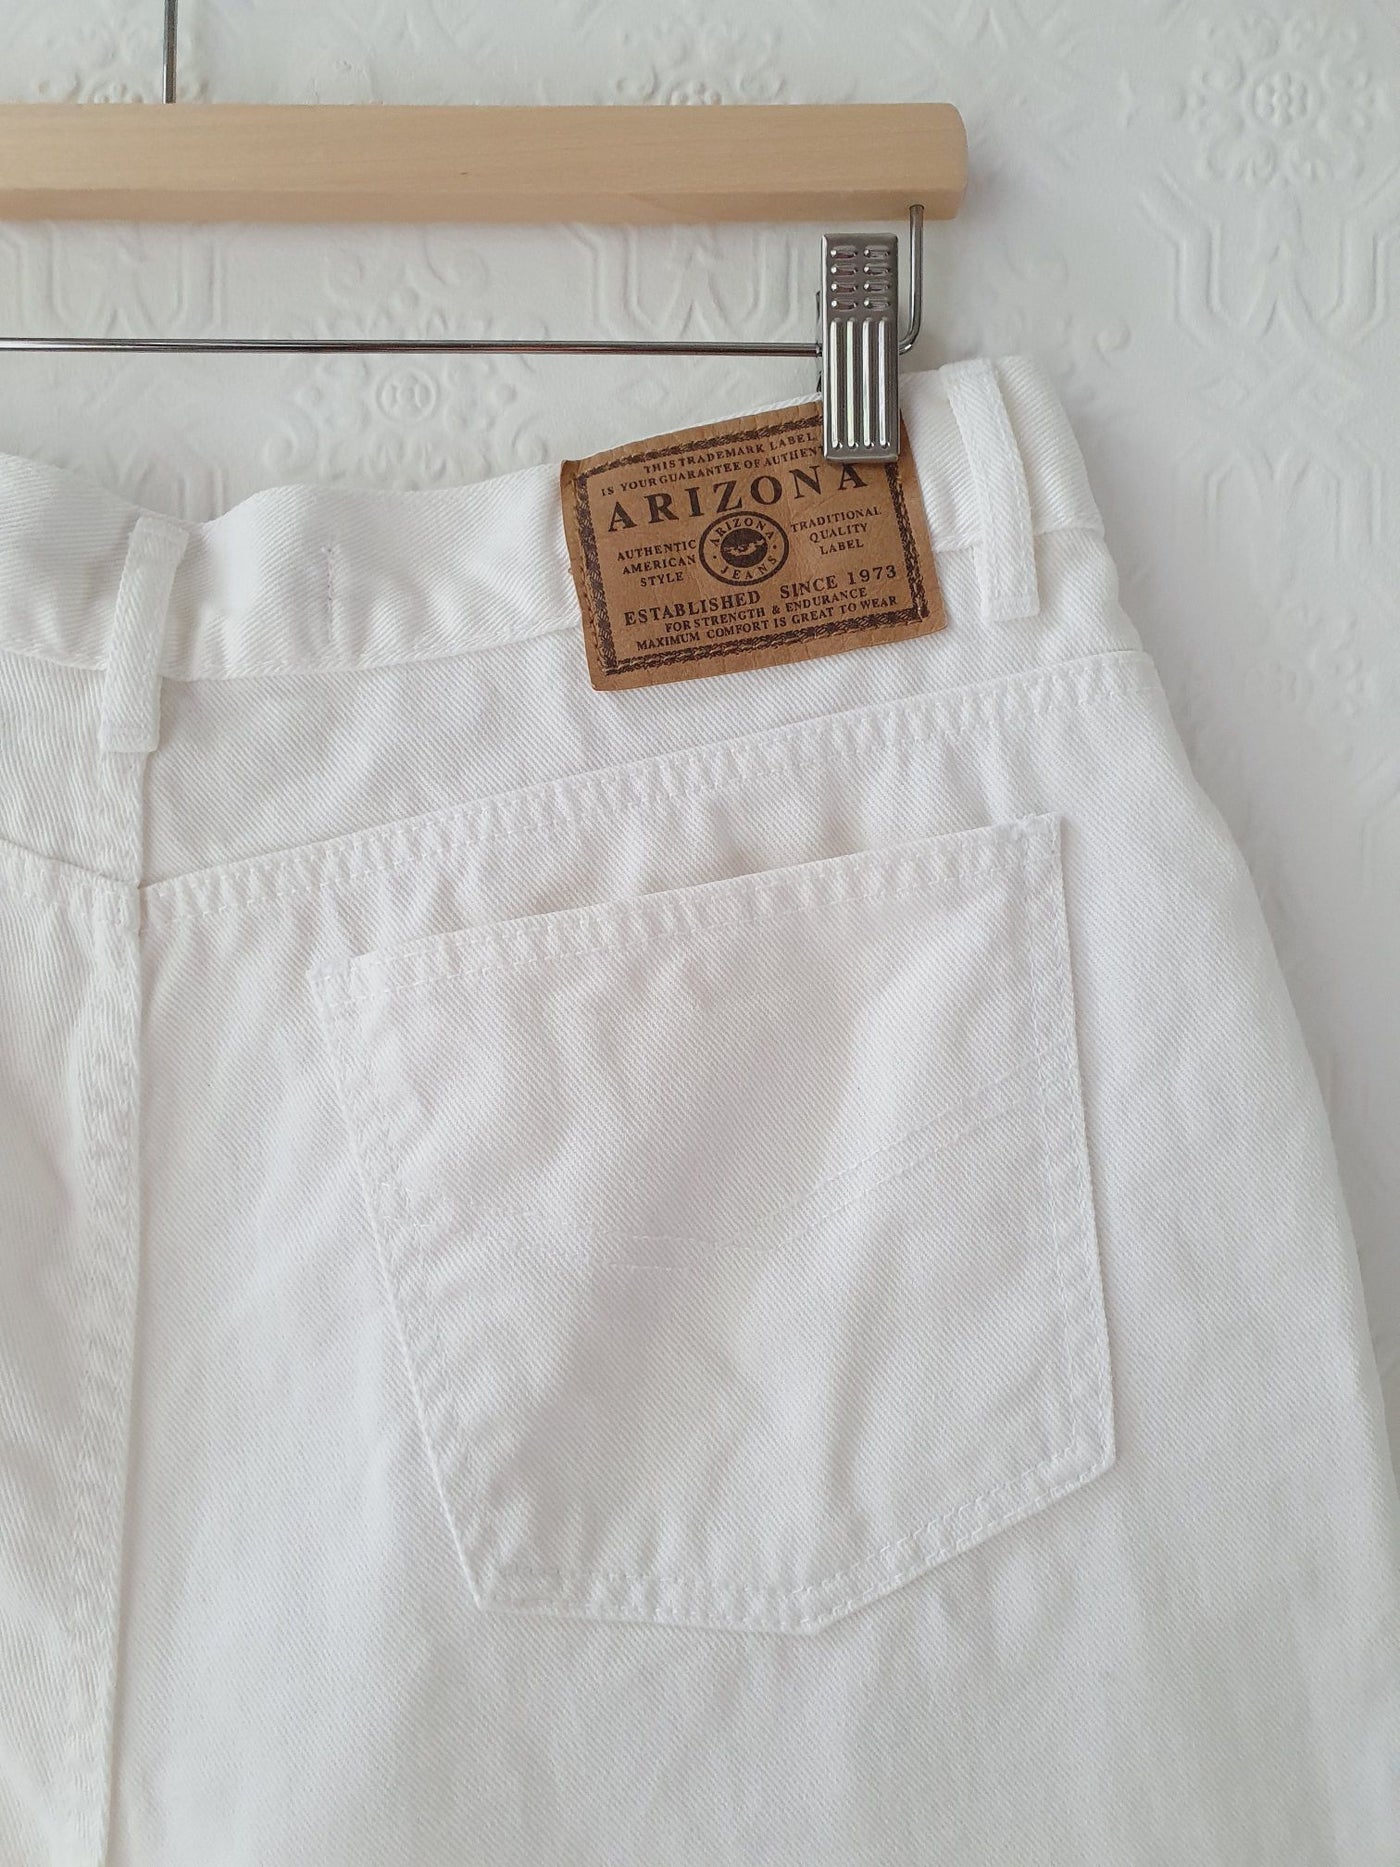 Vintage High Waisted White Jeans - 34W 29L